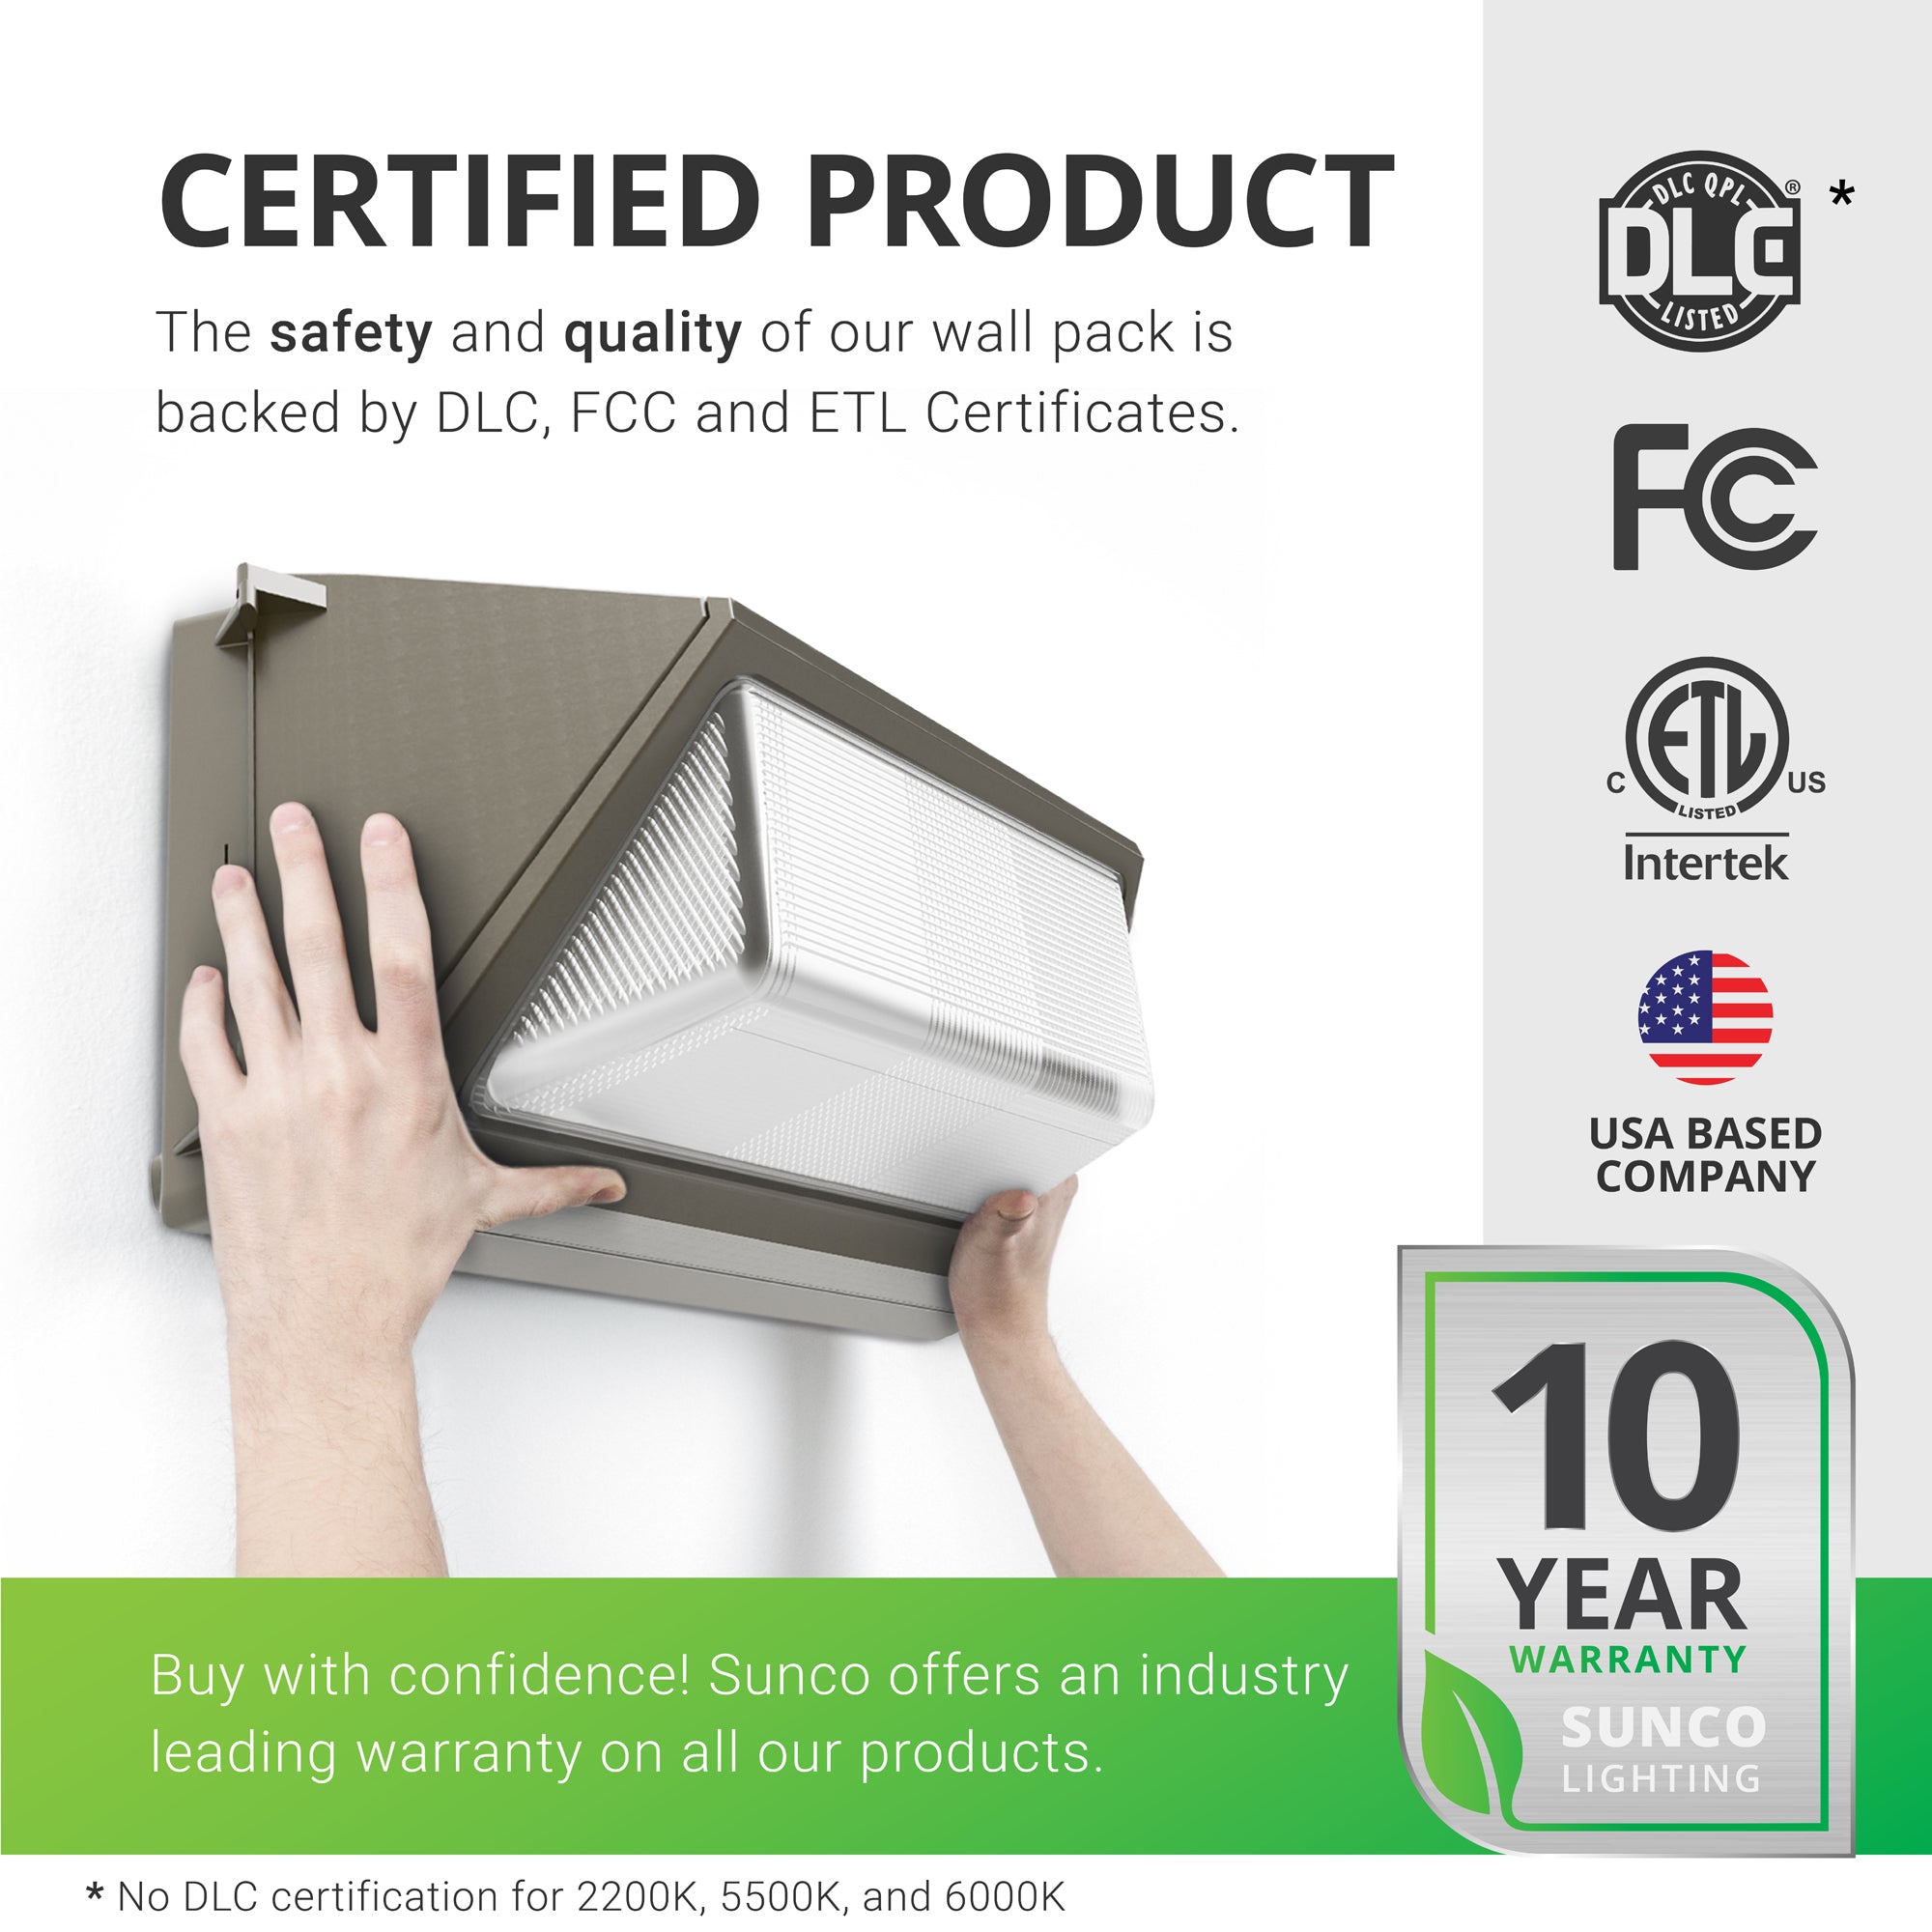 Certified Product. Sunco Lighting products are proudly backed by certificates to ensure the safety and quality of the products we sell. Our Wall Pack 120W is backed by DLC, FCC and ETL Certificates. There is no DLC certification for 2200K, 5500K, and 6000K color temperatures. This fixture only comes in 5000K Daylight. This Wall Pack 120W is covered by a 10-Year Warranty. Image shows the wall pack being positioned on the wall during the easy install process.